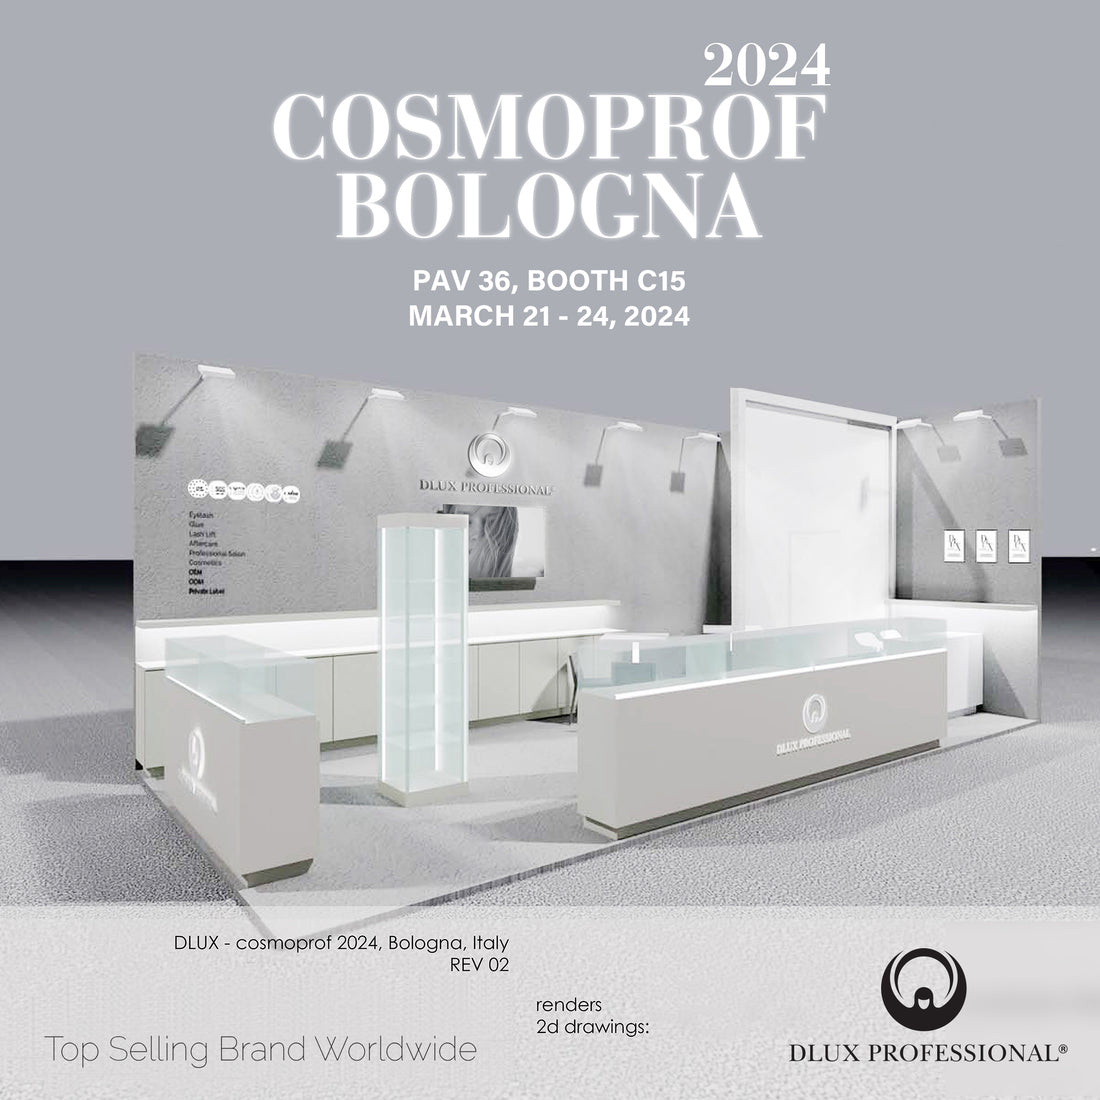 COSMOPROF Bologna 2024 Your Lash Haven at Pav 36, Booth C15! JL INT